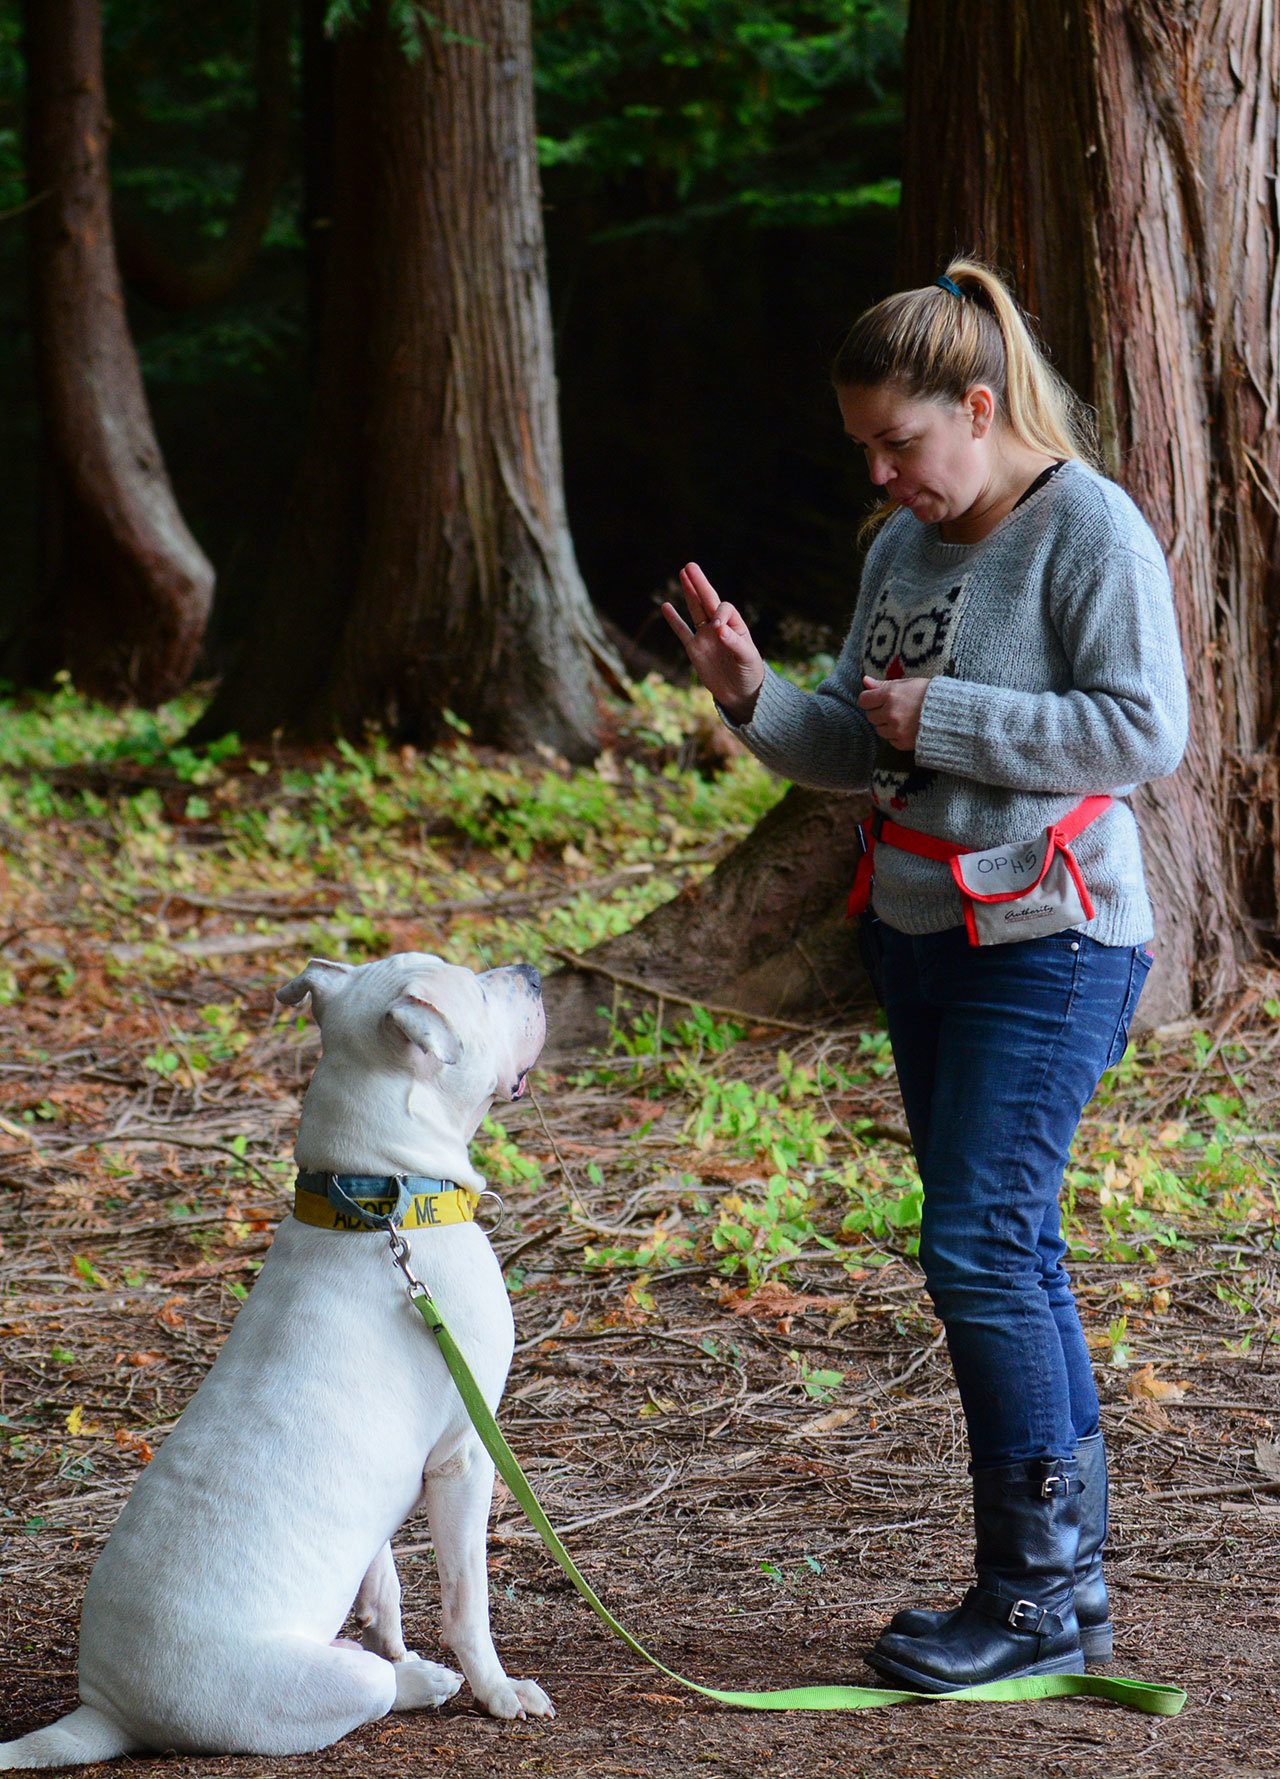 Ann Jorgensen, an animal behaviorist with Olympic Peninsula Humane Society, gives Otolith, a deaf Dogo Argentino, an “OK” sign with her hand to give him praise. (Jesse Major/Peninsula Daily News)